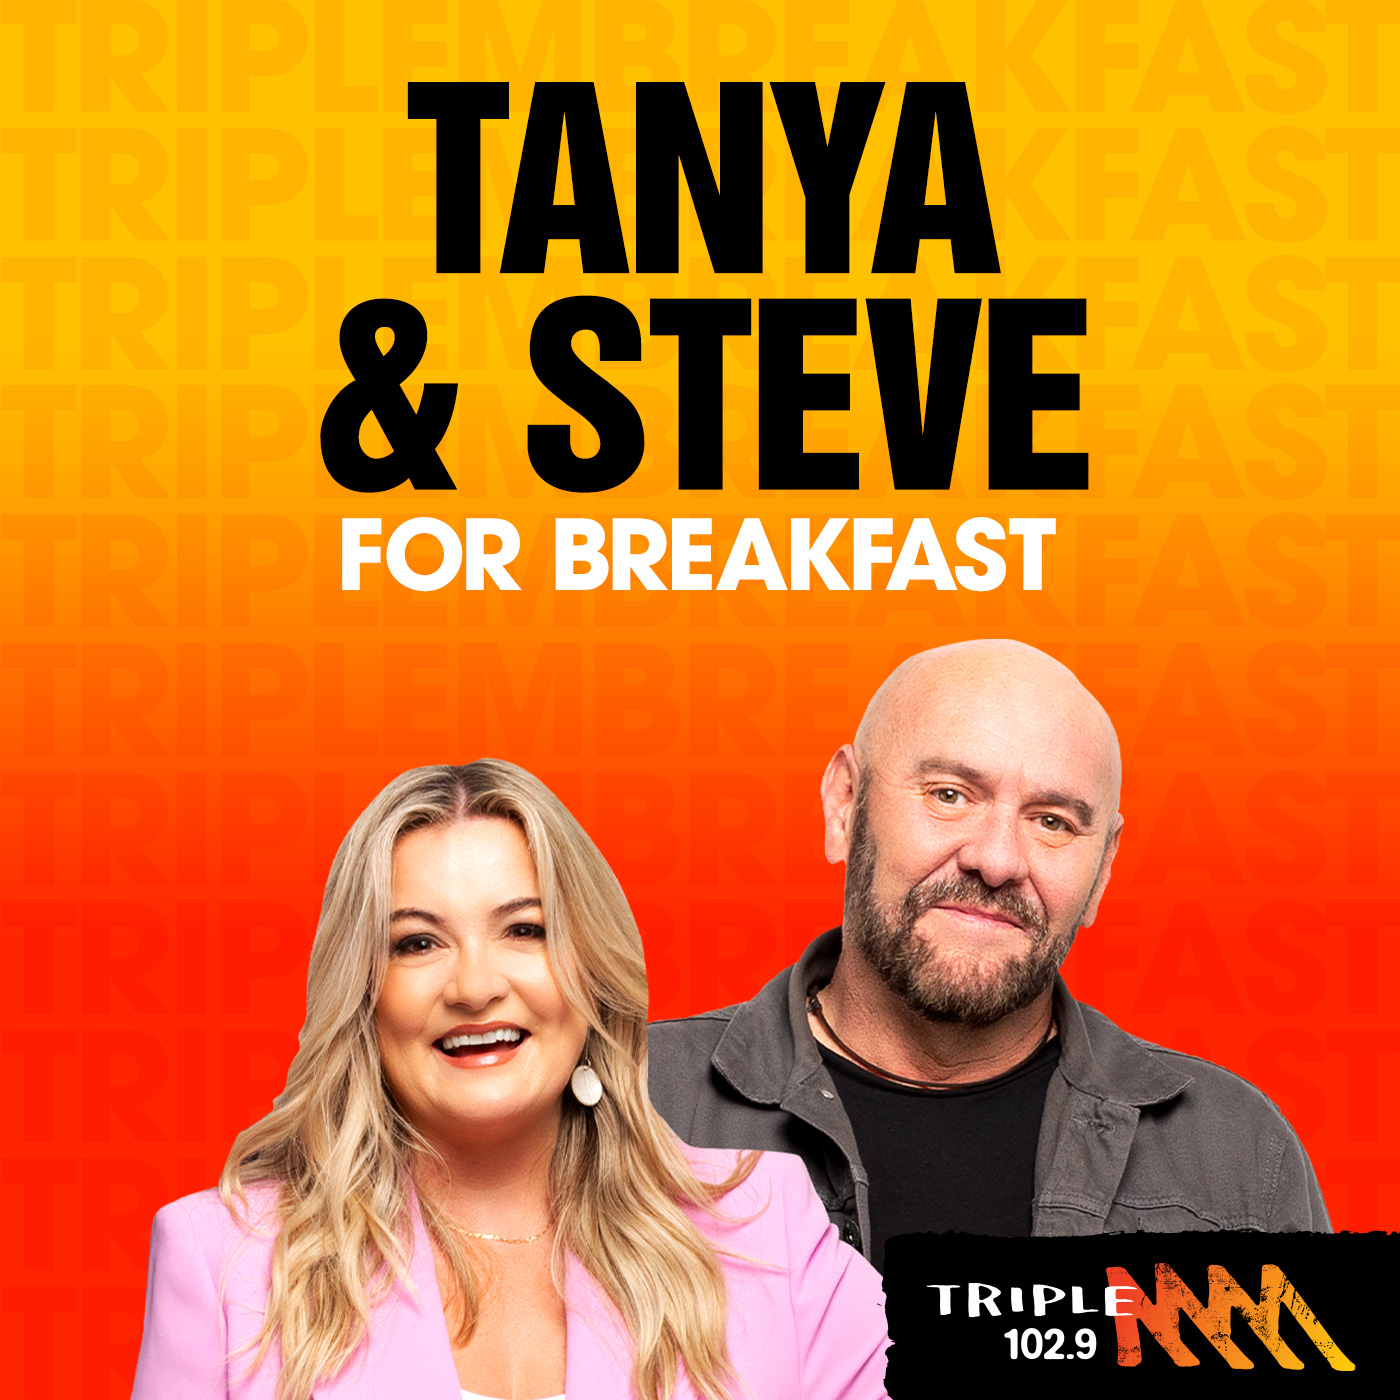 FULL SHOW: Steve has Cancer* But Tanya thinks he'll live!